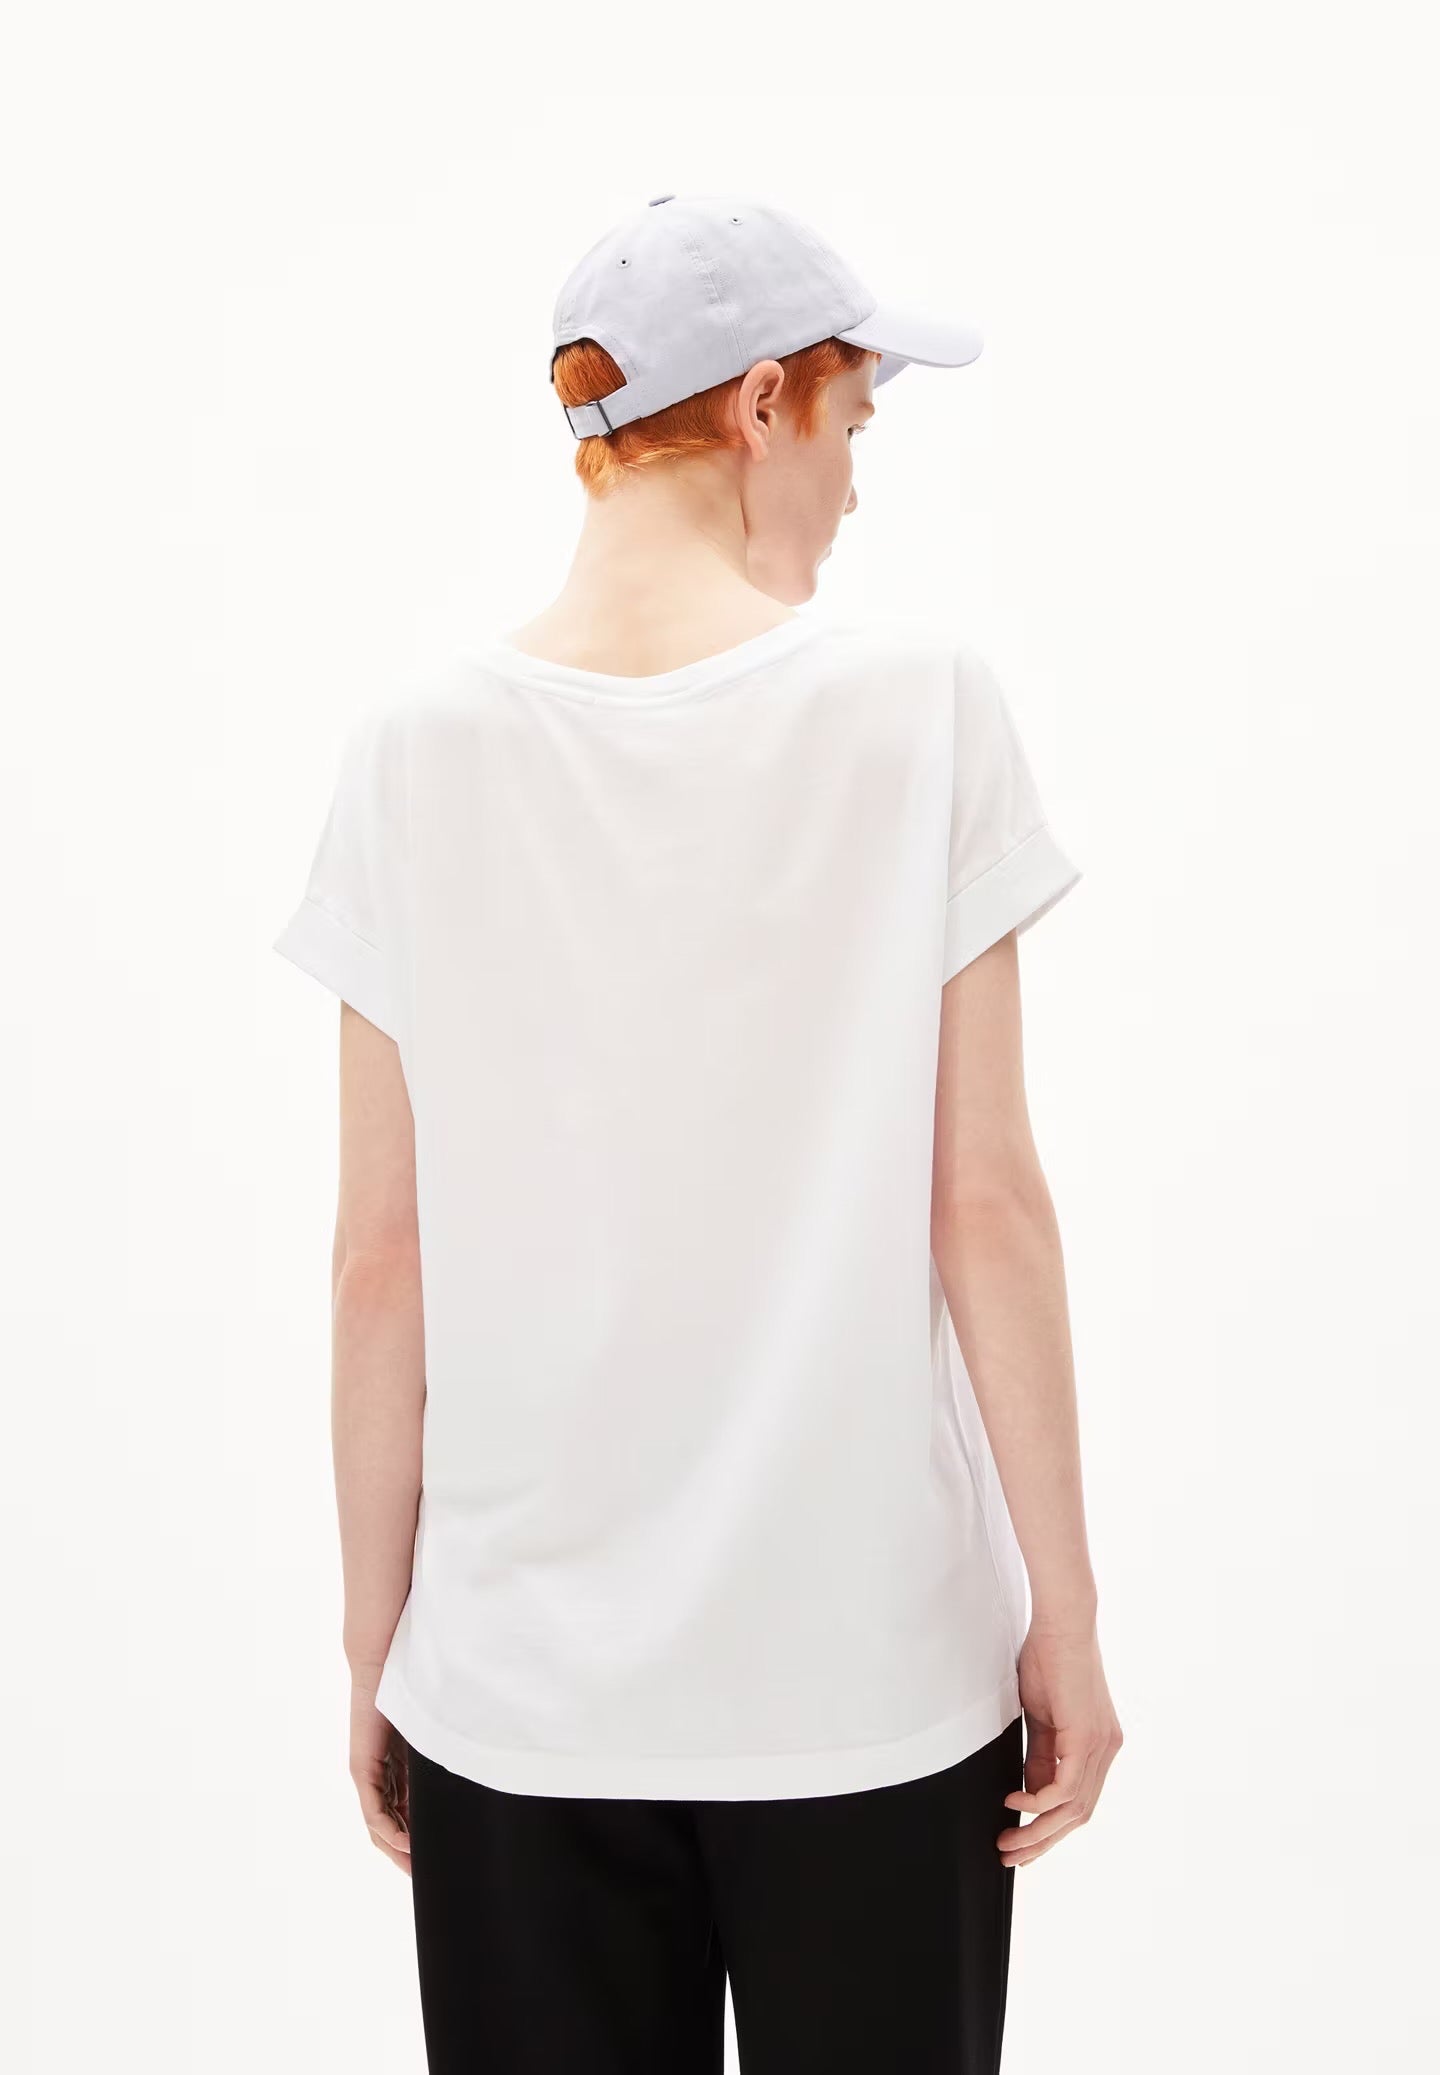 Loose fit t-shirt from Armedangels, with cap sleeves and a round neck, in white, made from sustainable organic cotton.